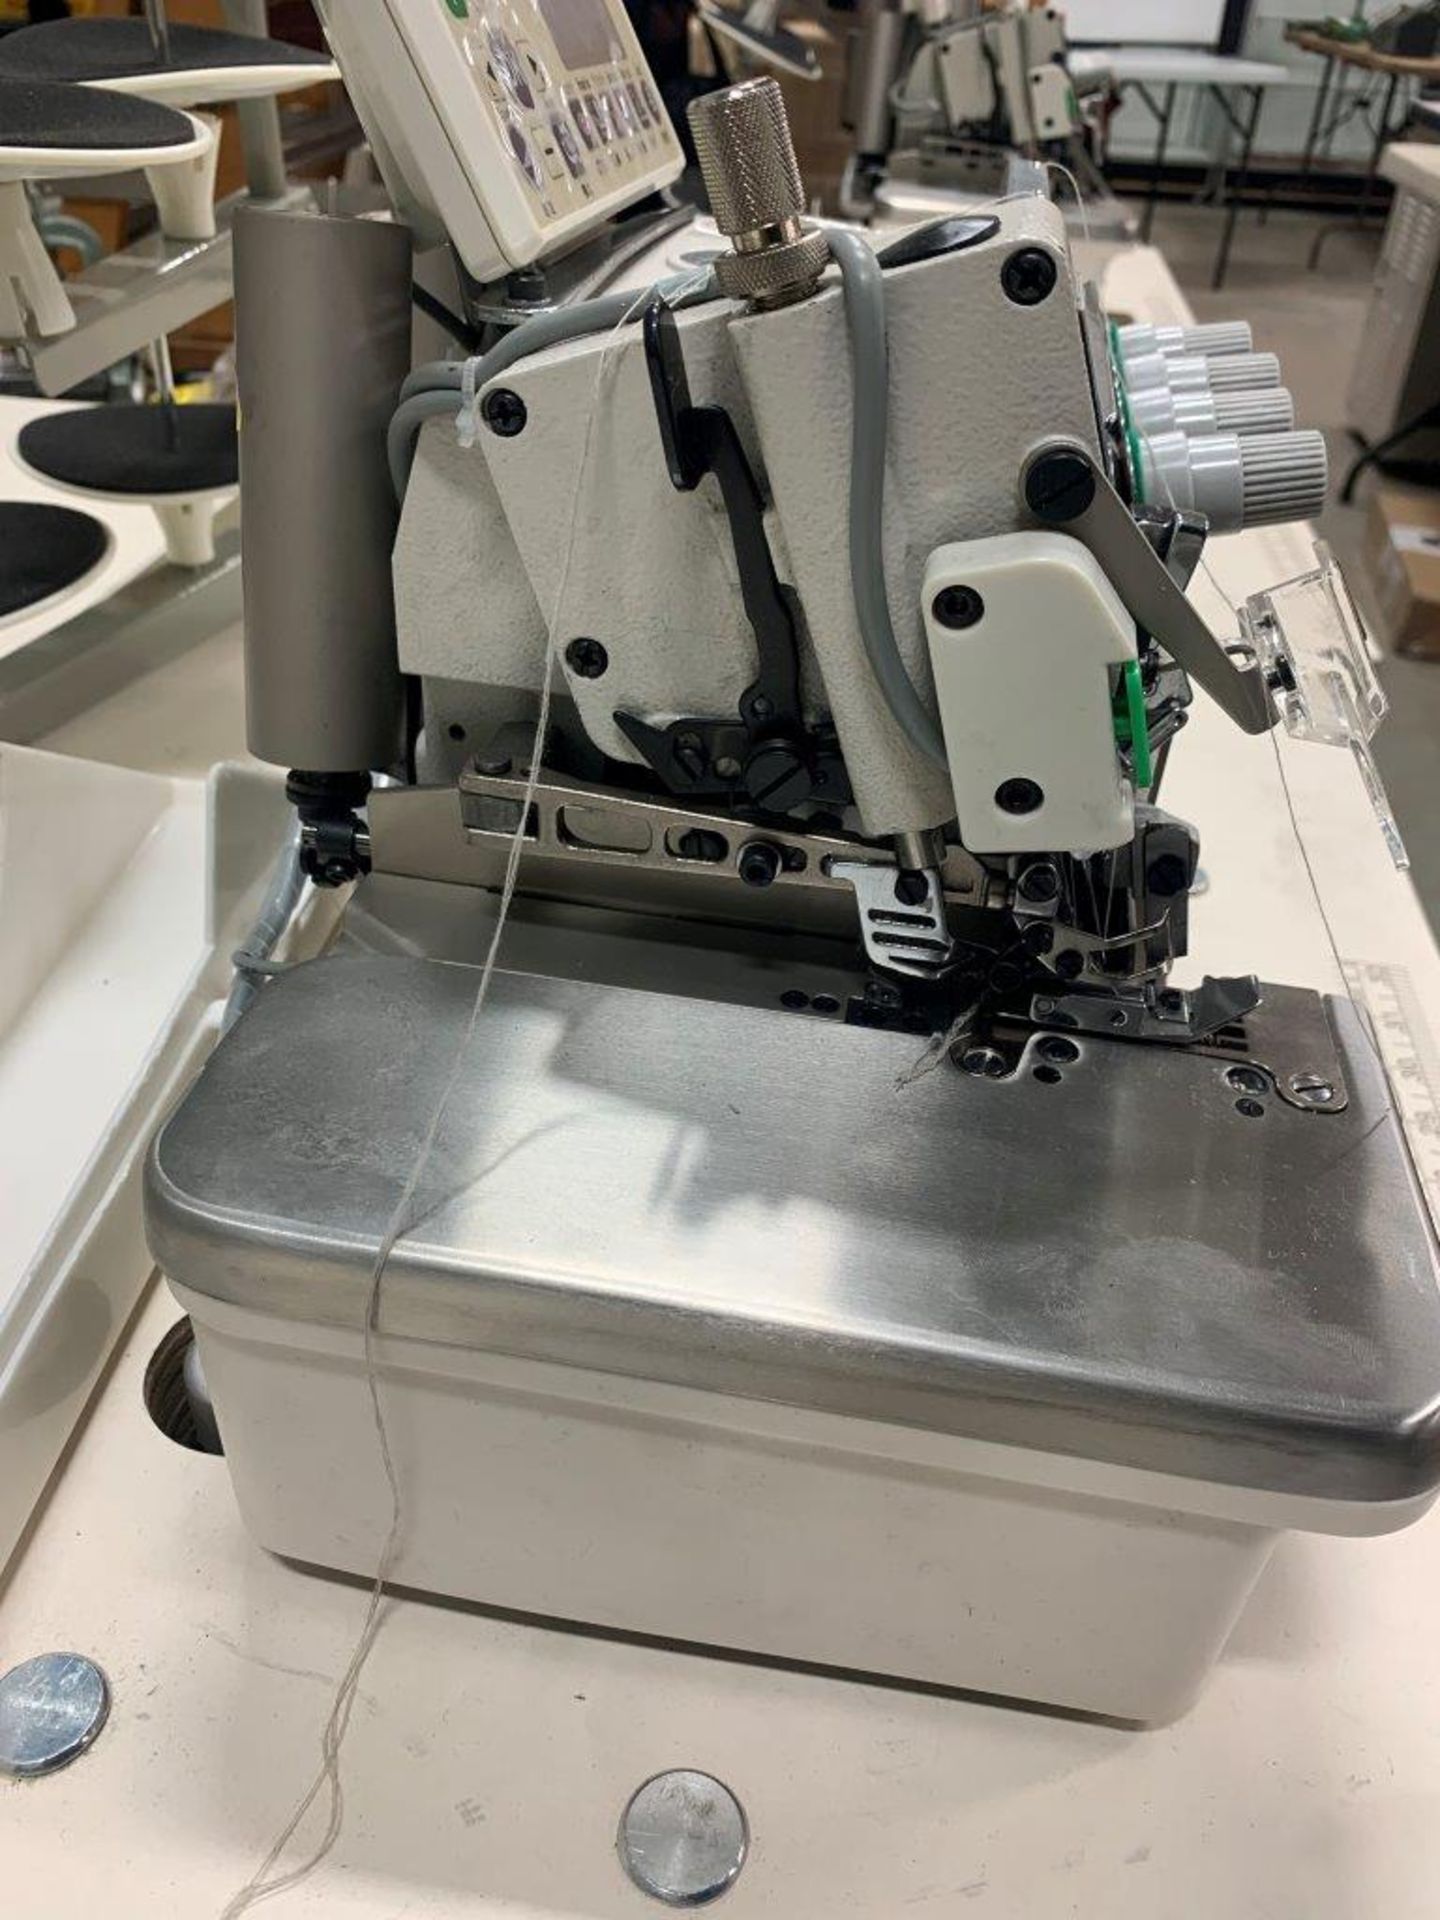 DOIT EX AUTOMATIC SEWING MACHINE W/ TABLE, FOOT PEDAL, MOTOR, S/N DT3216EX-02/233/KS/DD - DIGITAL - Image 7 of 8